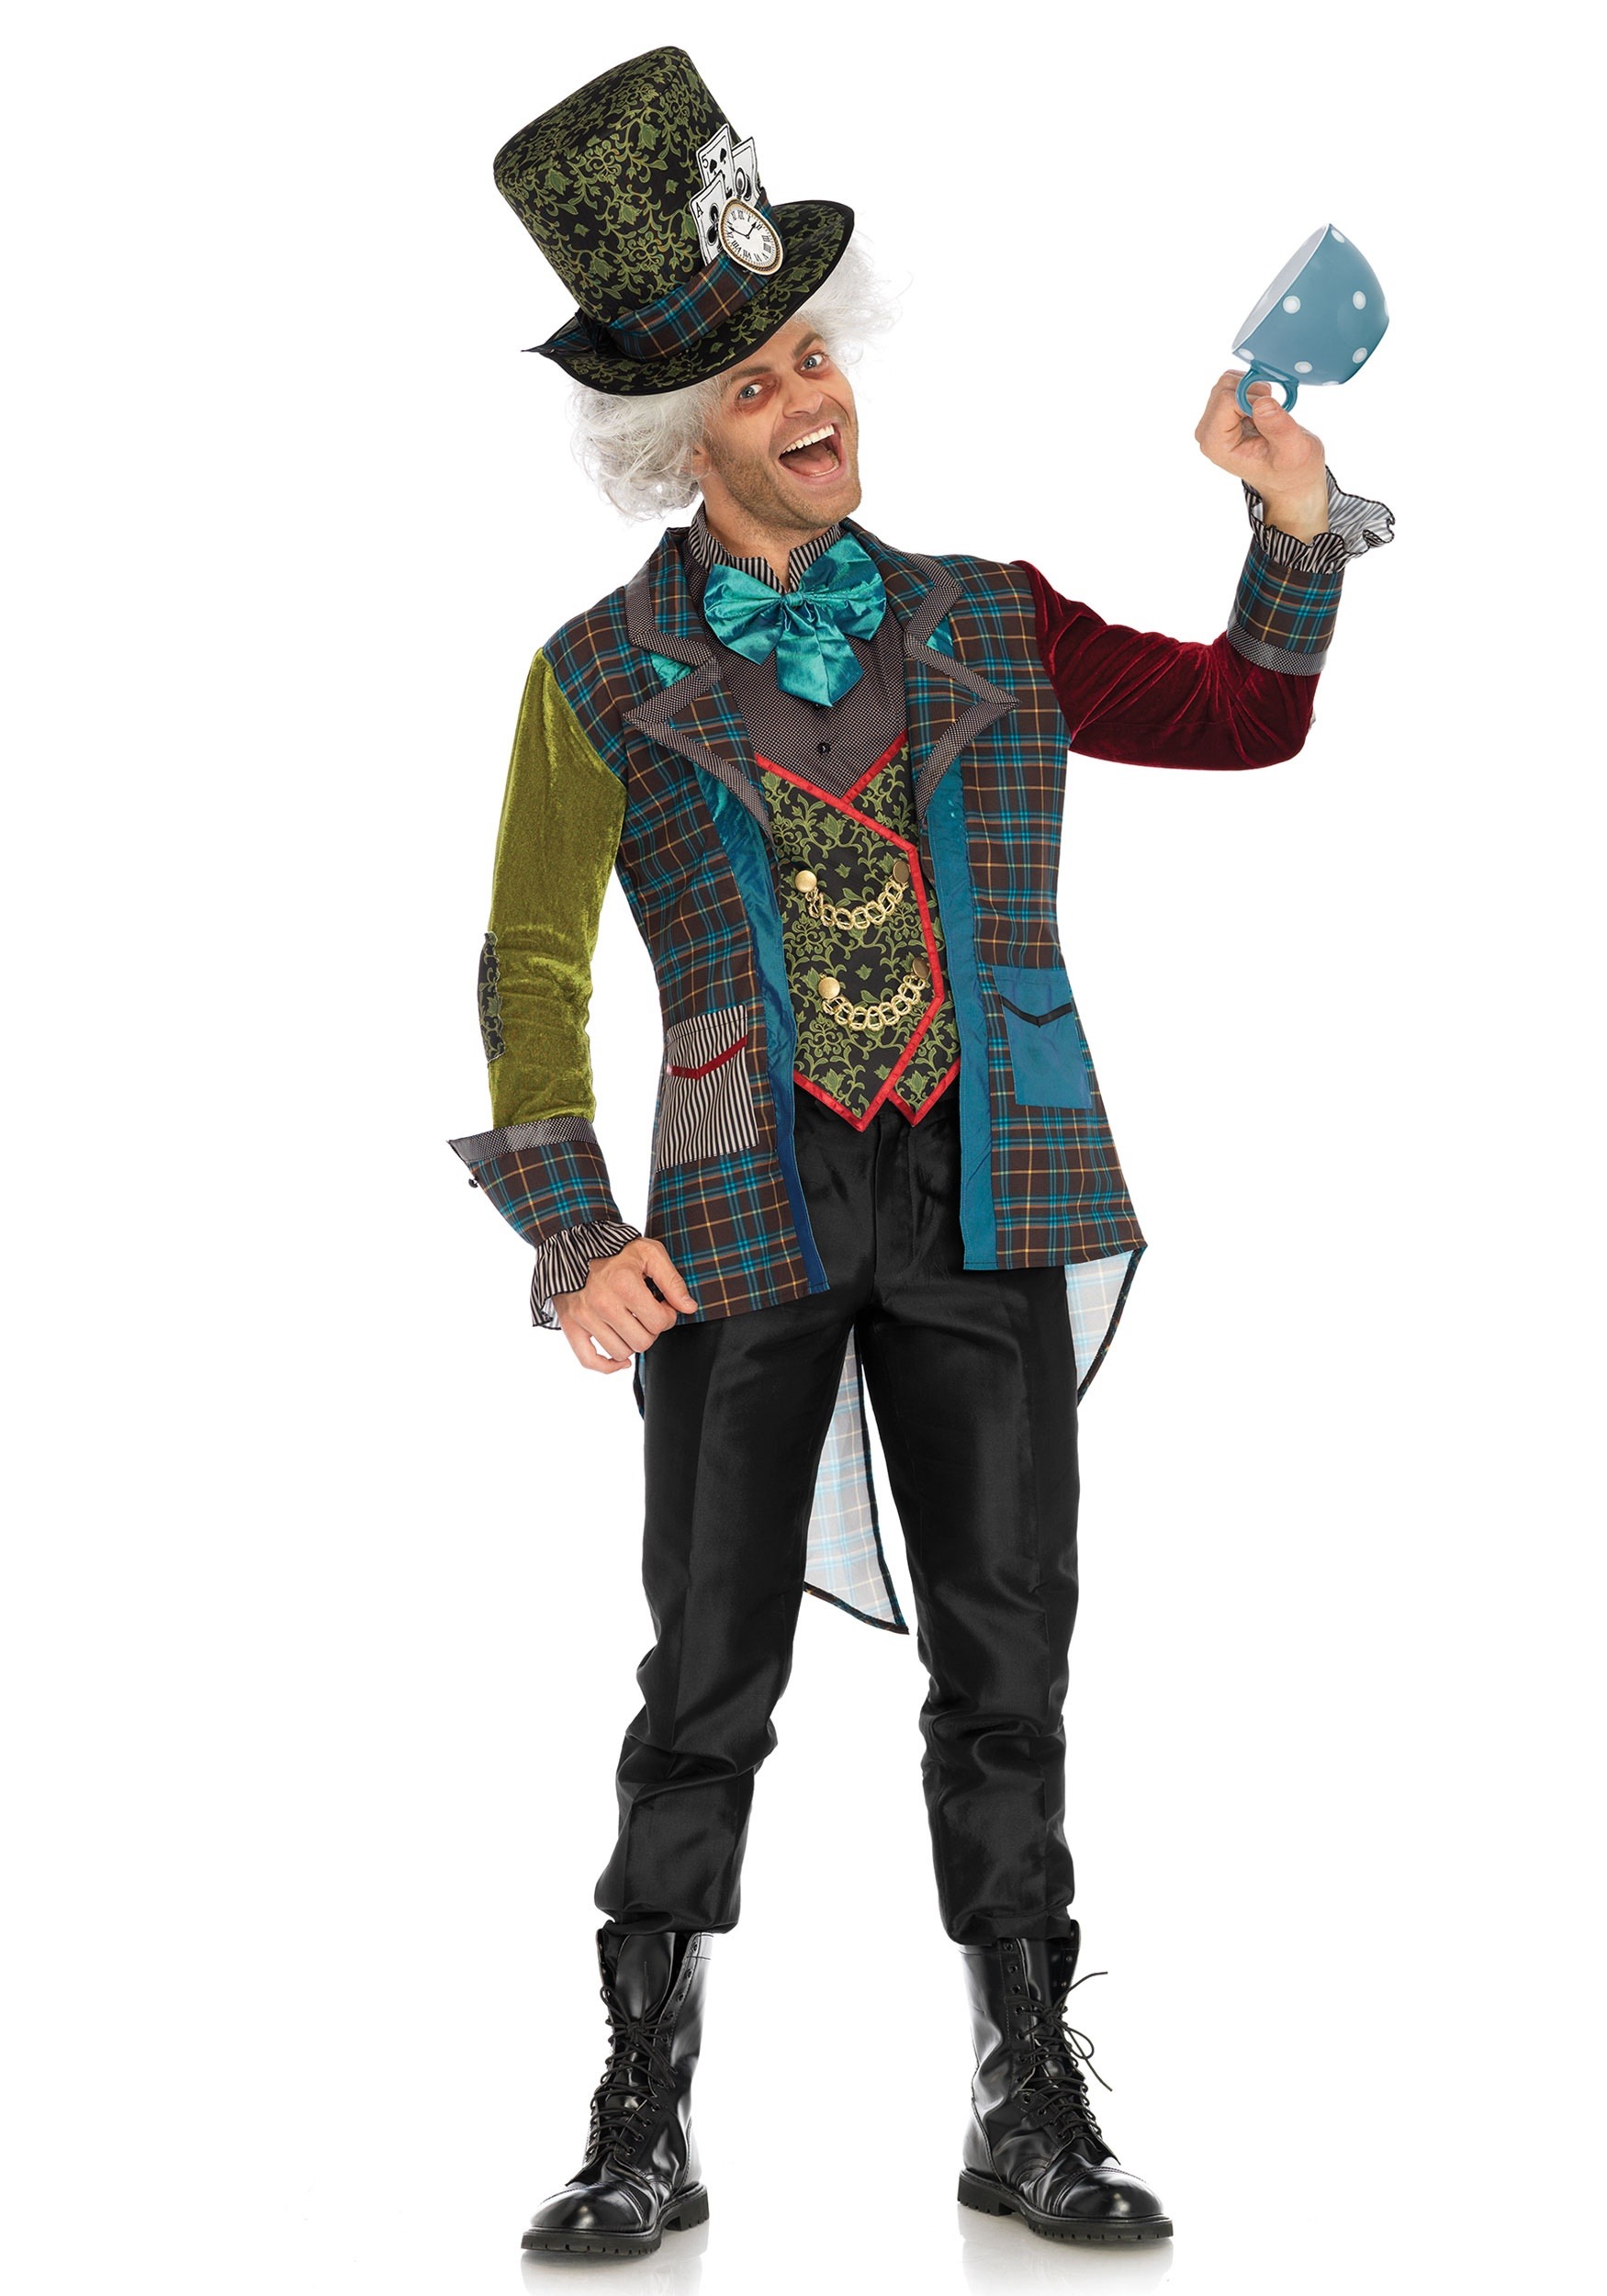 Image of Colorful Mad Hatter Costume for Men ID LE86691-M